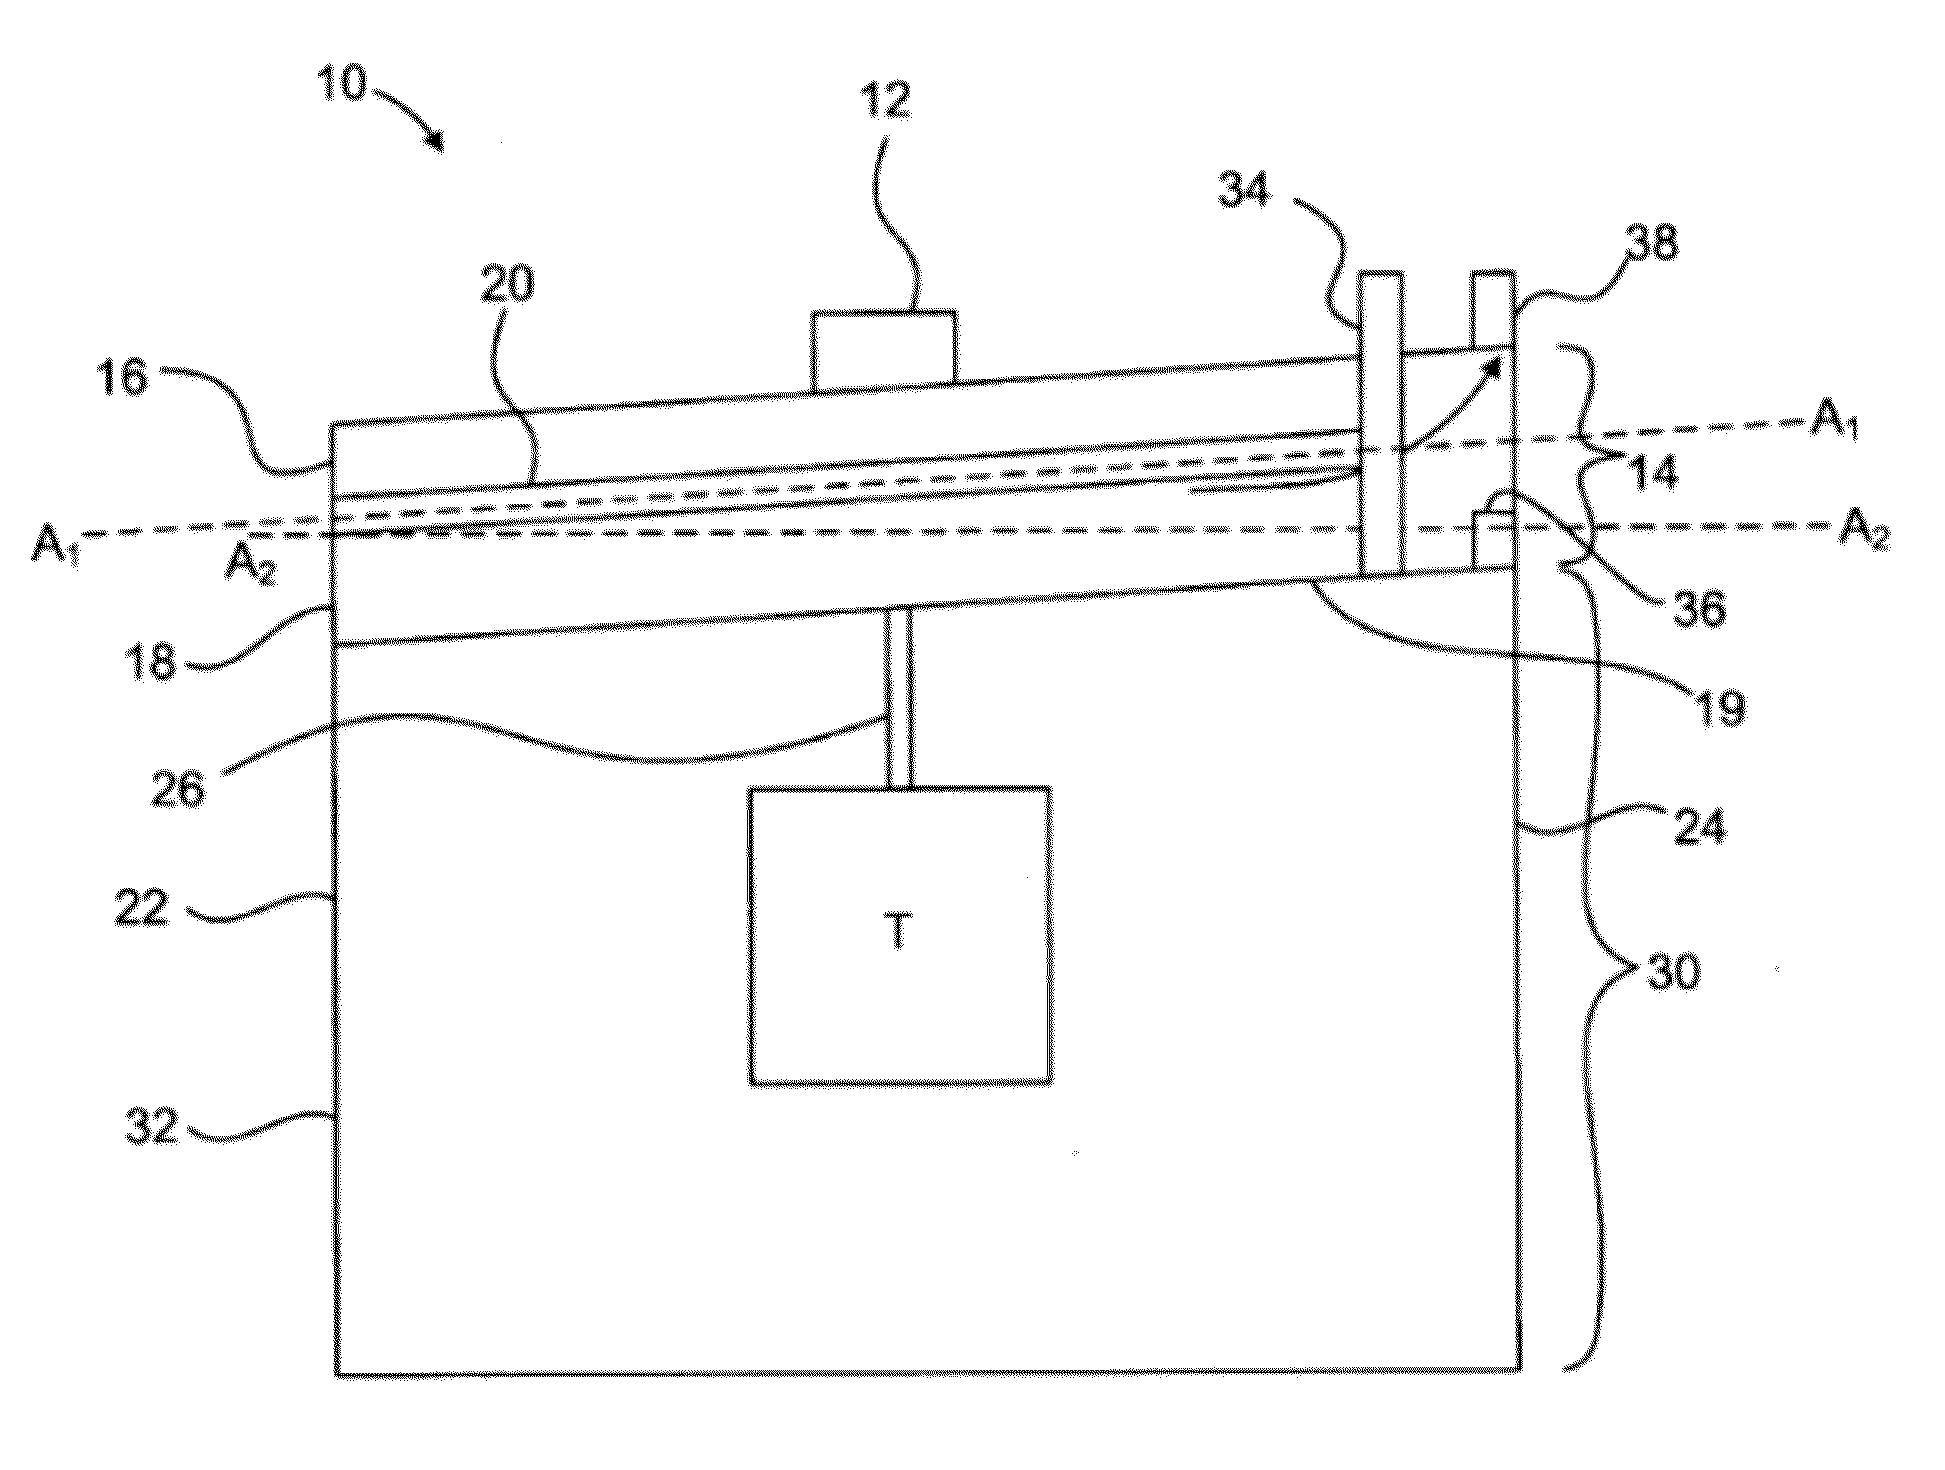 Apparatus for oxygenation and perfusion of tissue for organ preservation